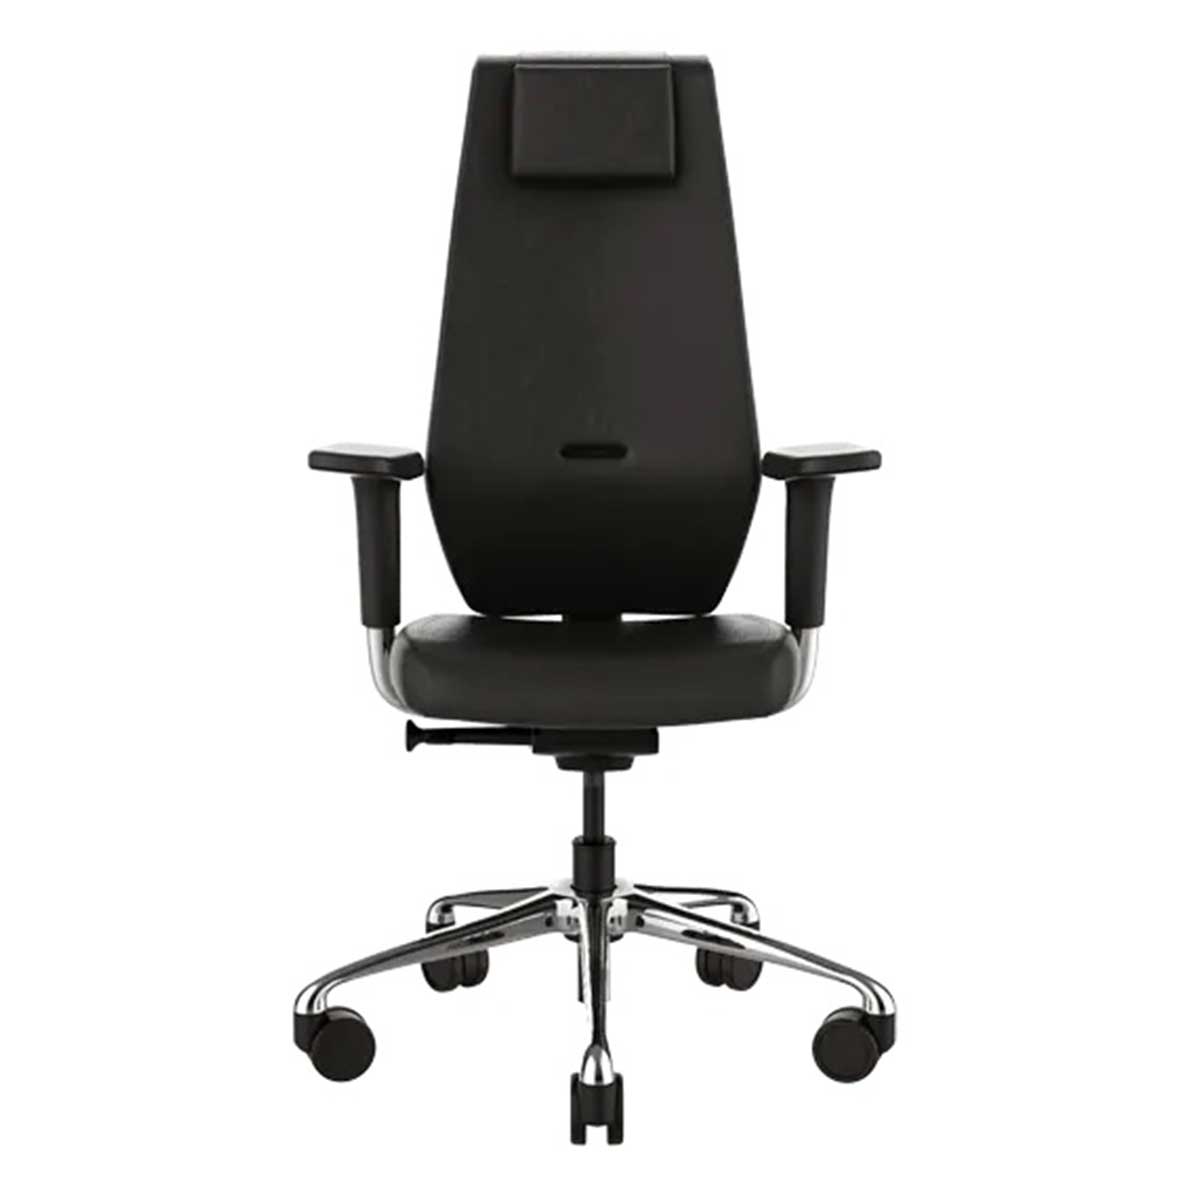 Mesh Executive Chair Manufacturers, Suppliers in Greater Kailash Ii